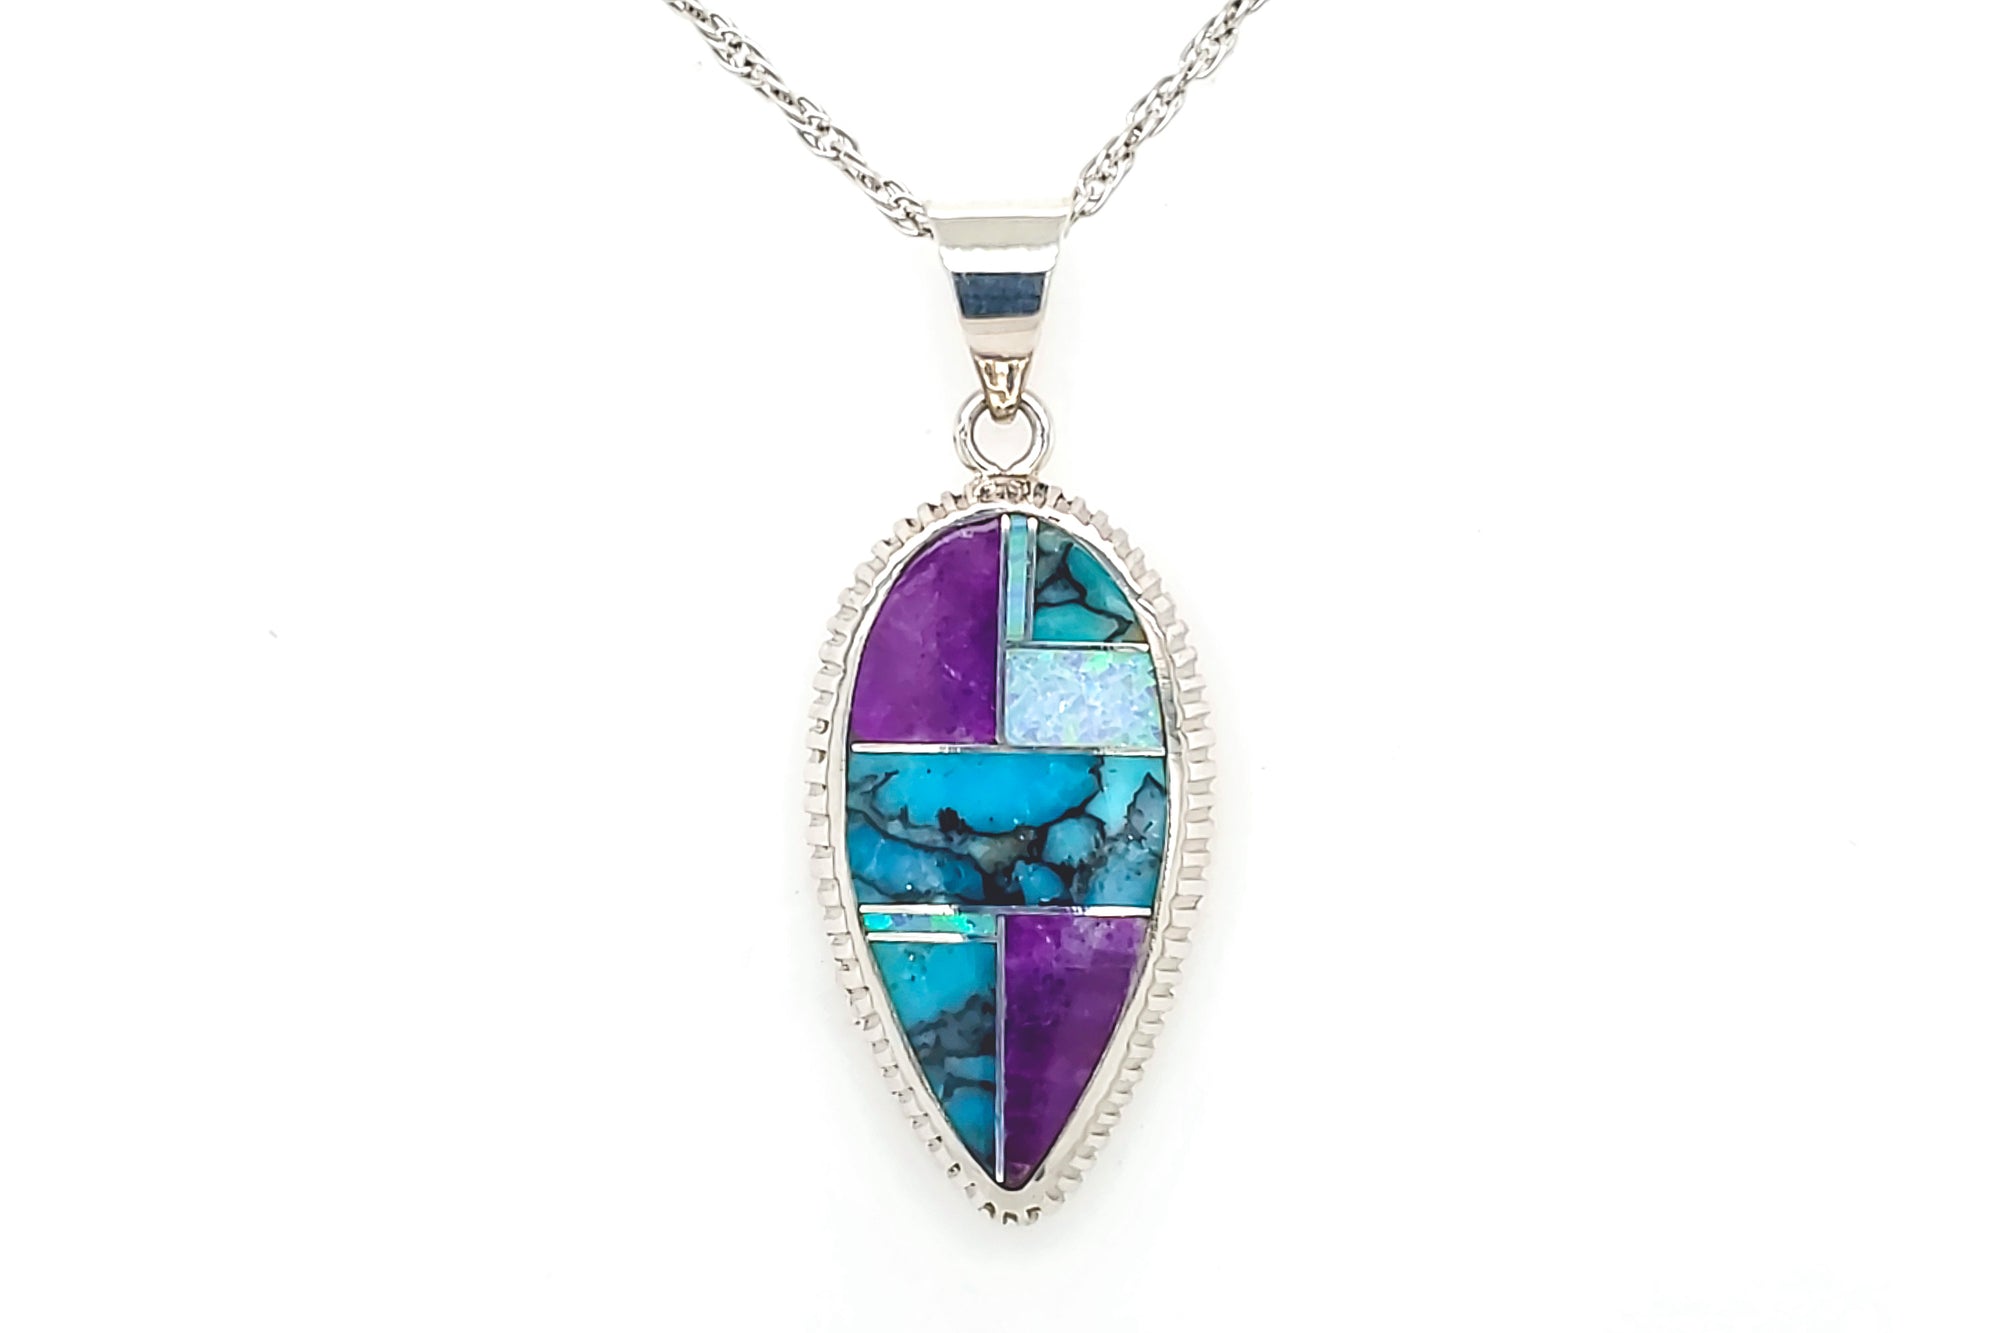 Turquoise and Sugilite Pendant by David Rosales